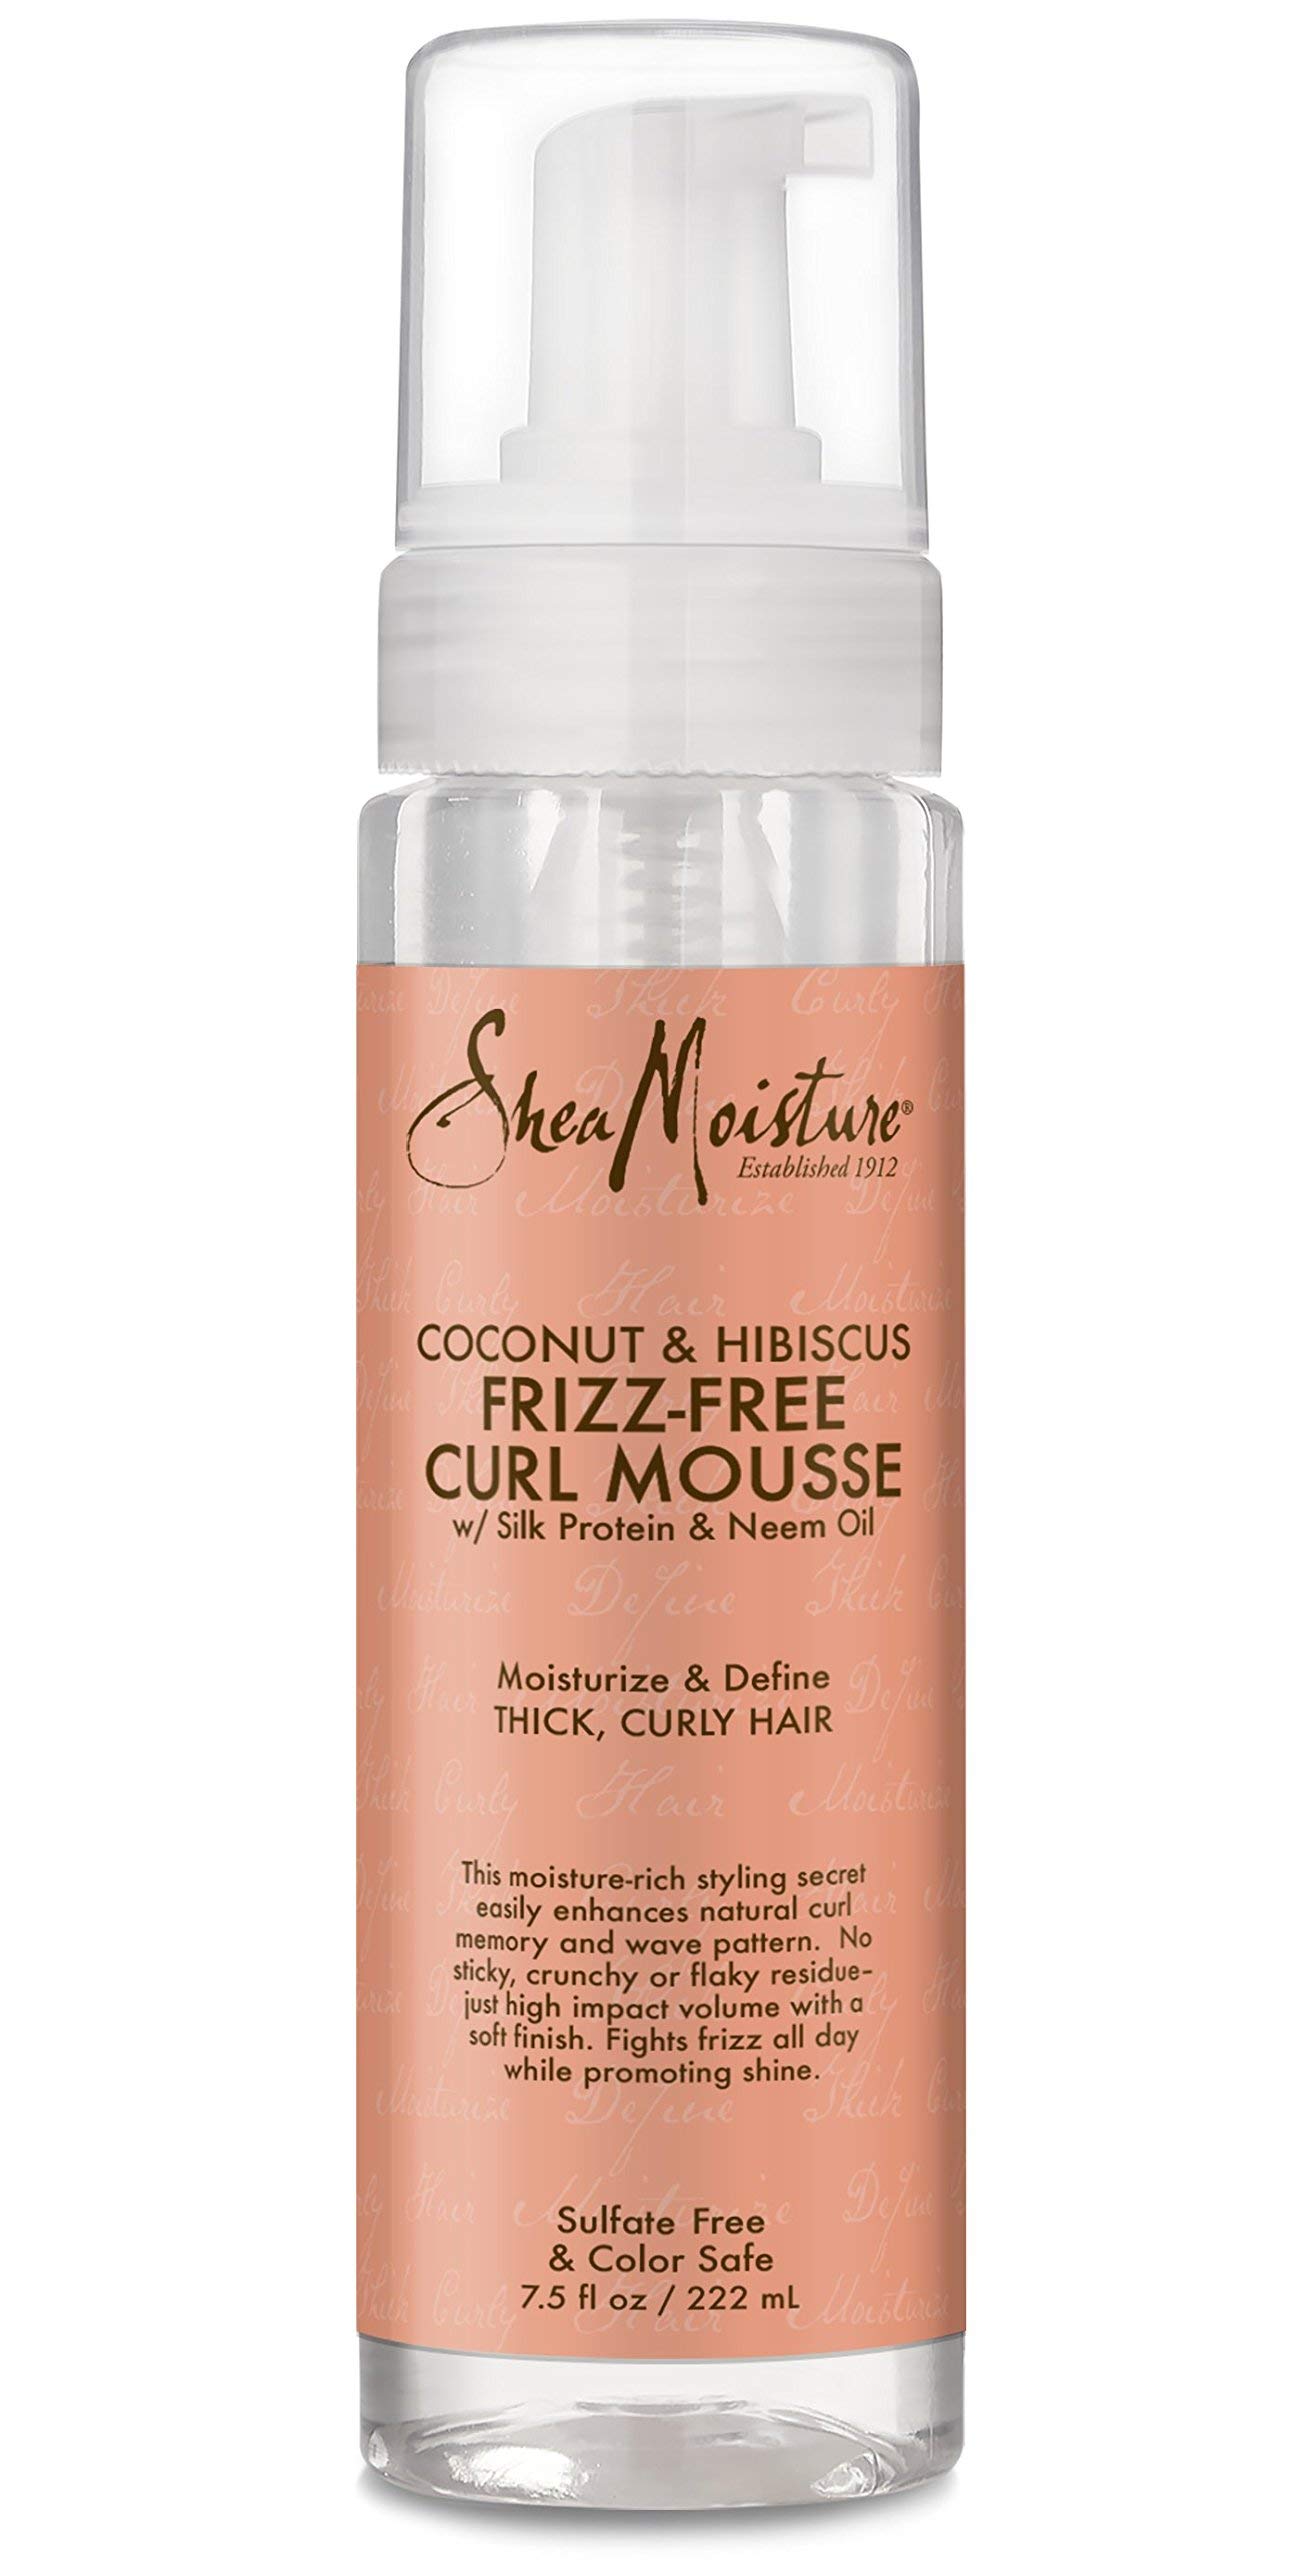 SheaMoisture Curly Hair Products, Coconut & Hibiscus Curl Mousse, Frizz Free Hair with Silk Protein & Neem Oil, Pack of 2-7.5 Oz Each